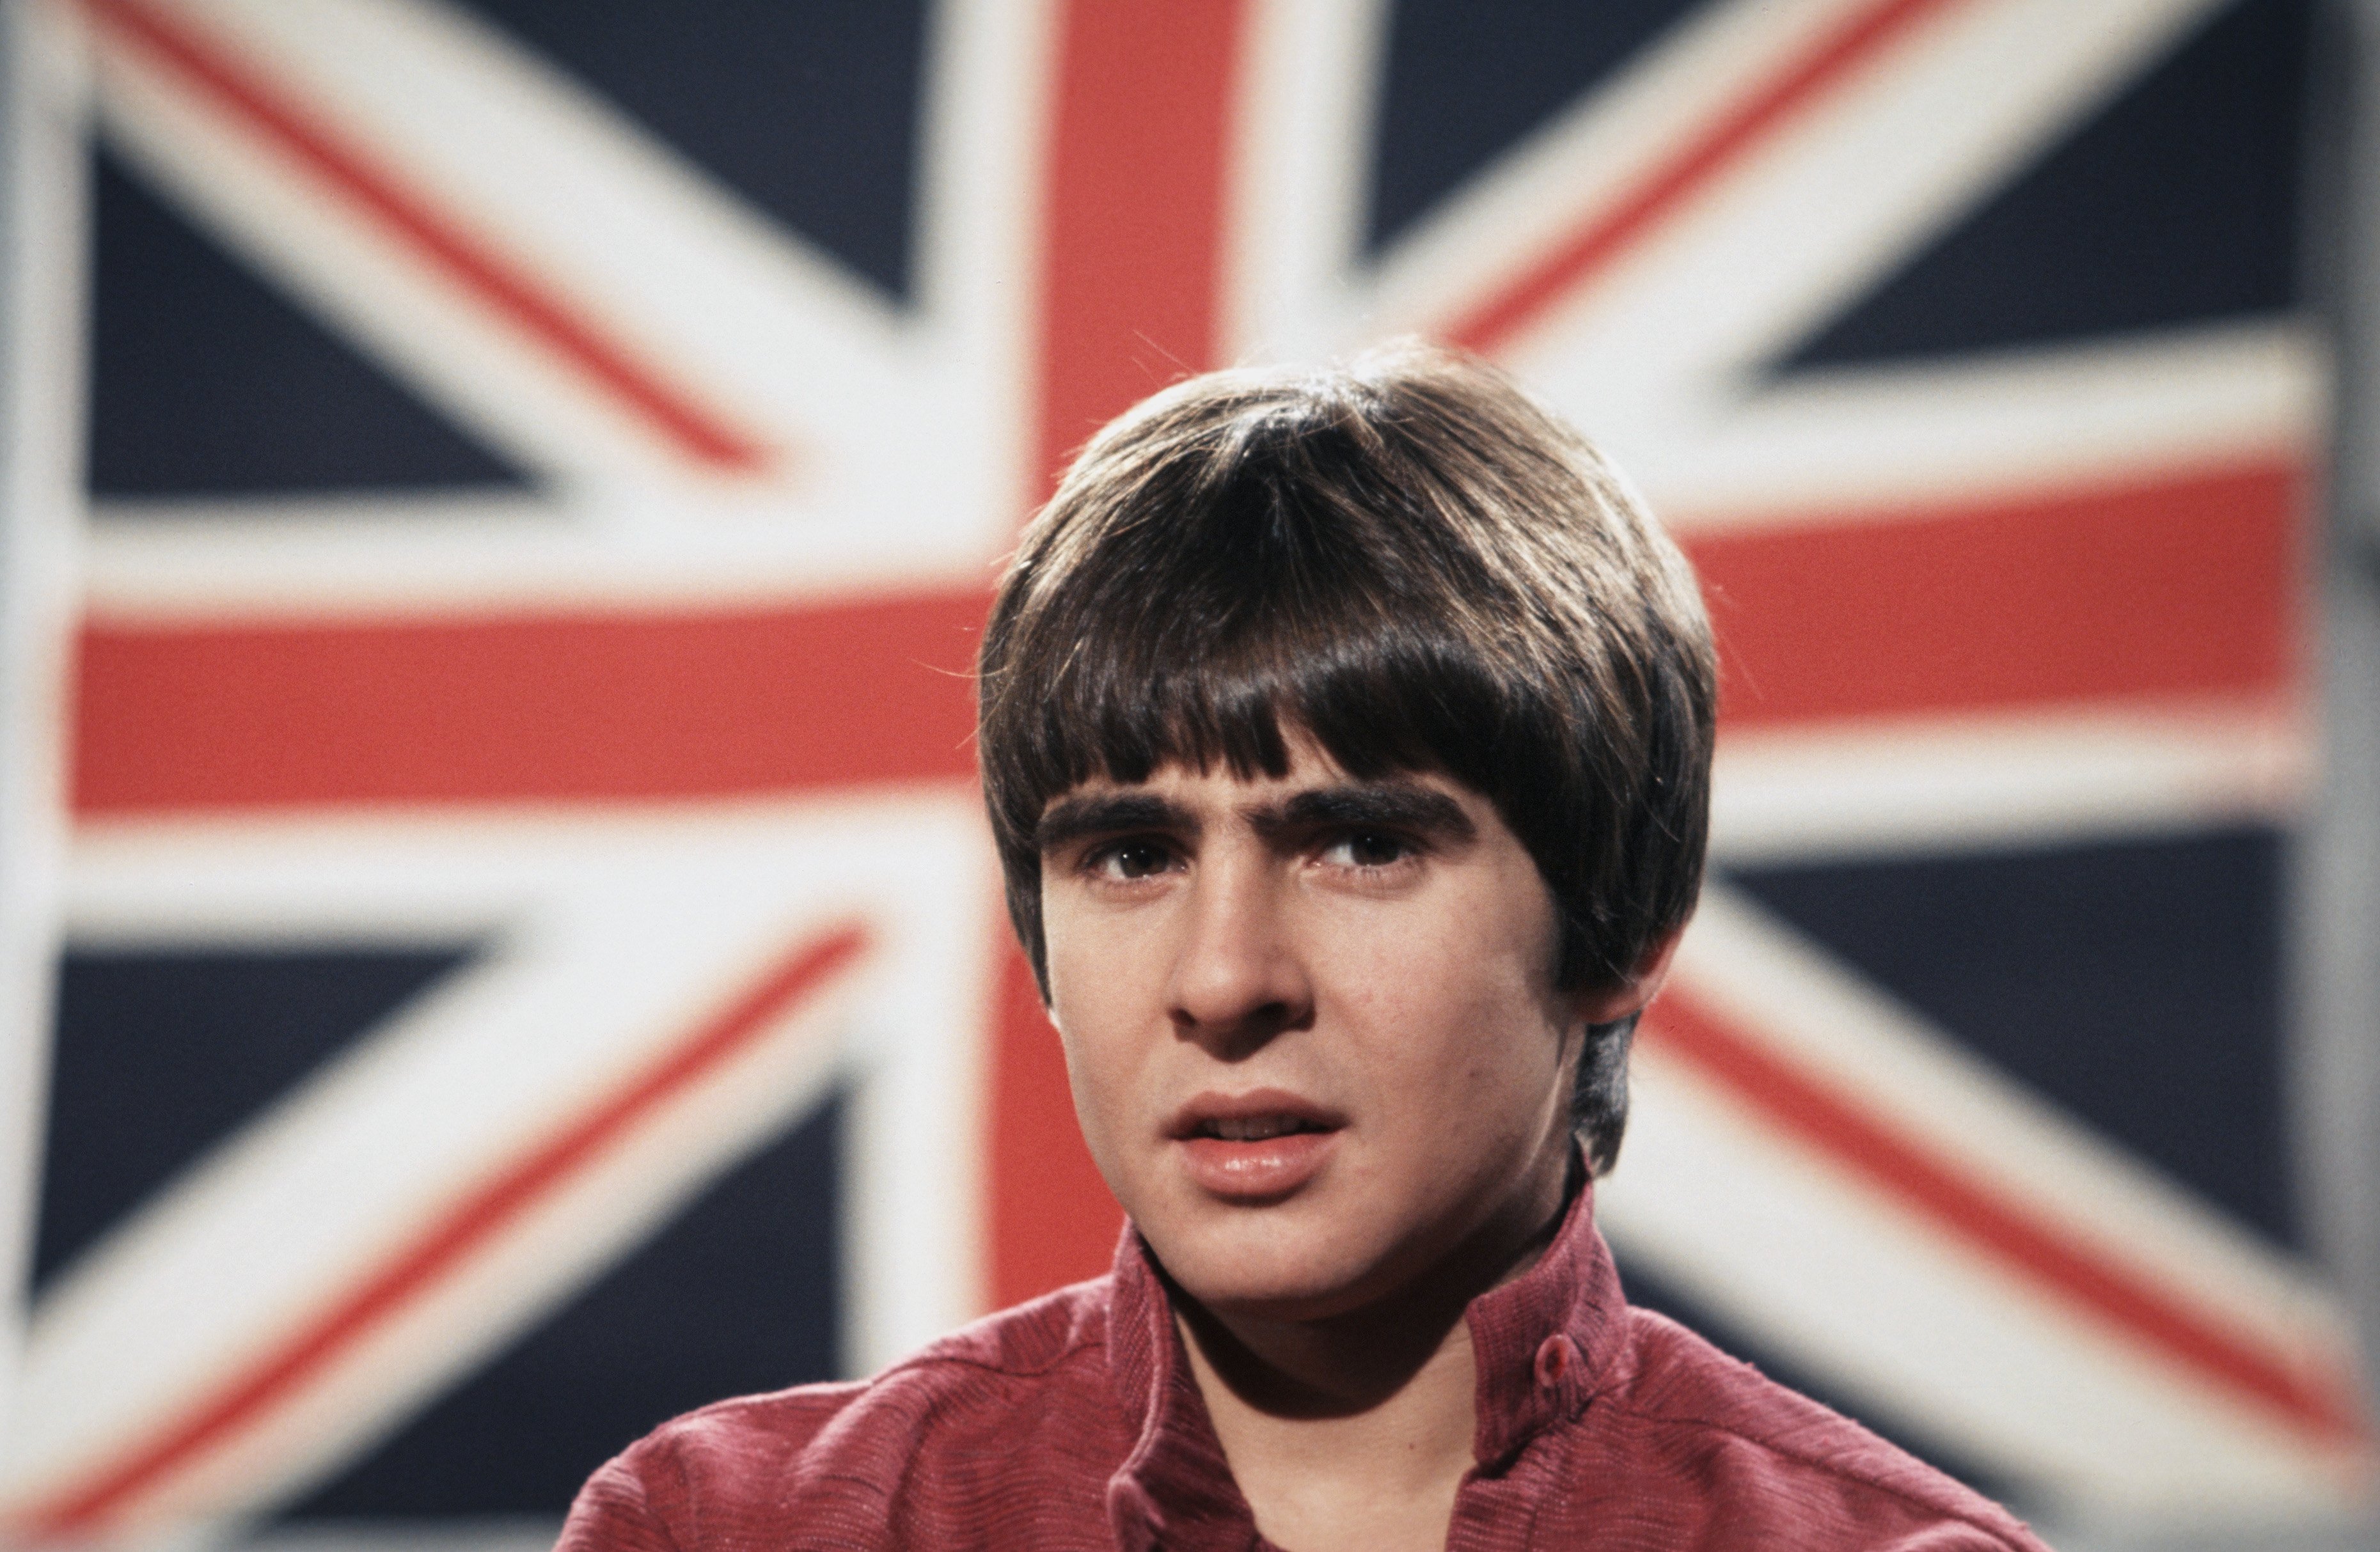 The Monkees' Davy Jones in front of the flag of the United Kingdom